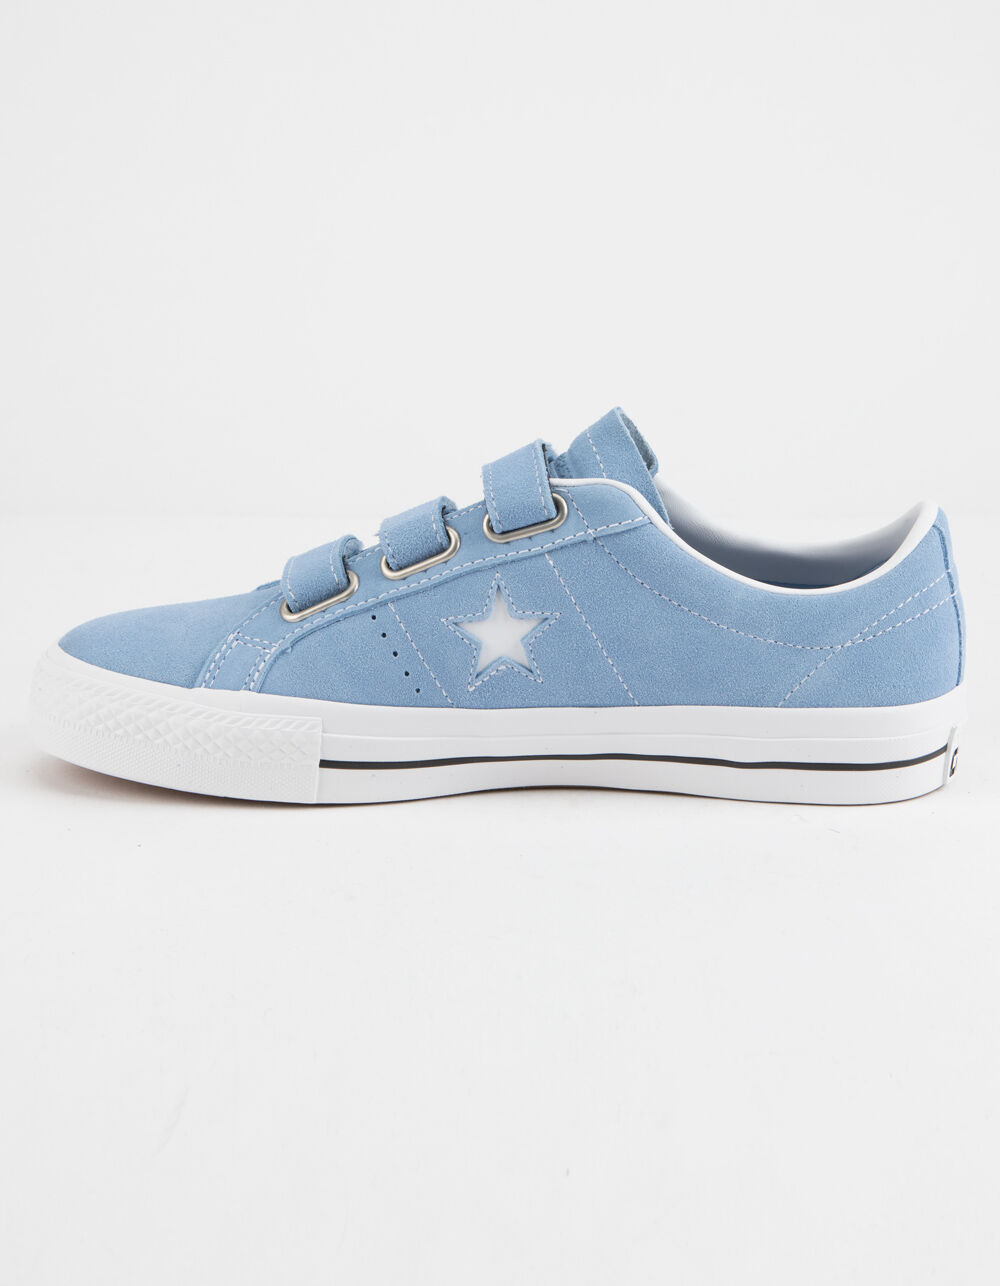 CONVERSE One Star Pro 3v Ox Light Blue & White Velcro Shoes image number 3